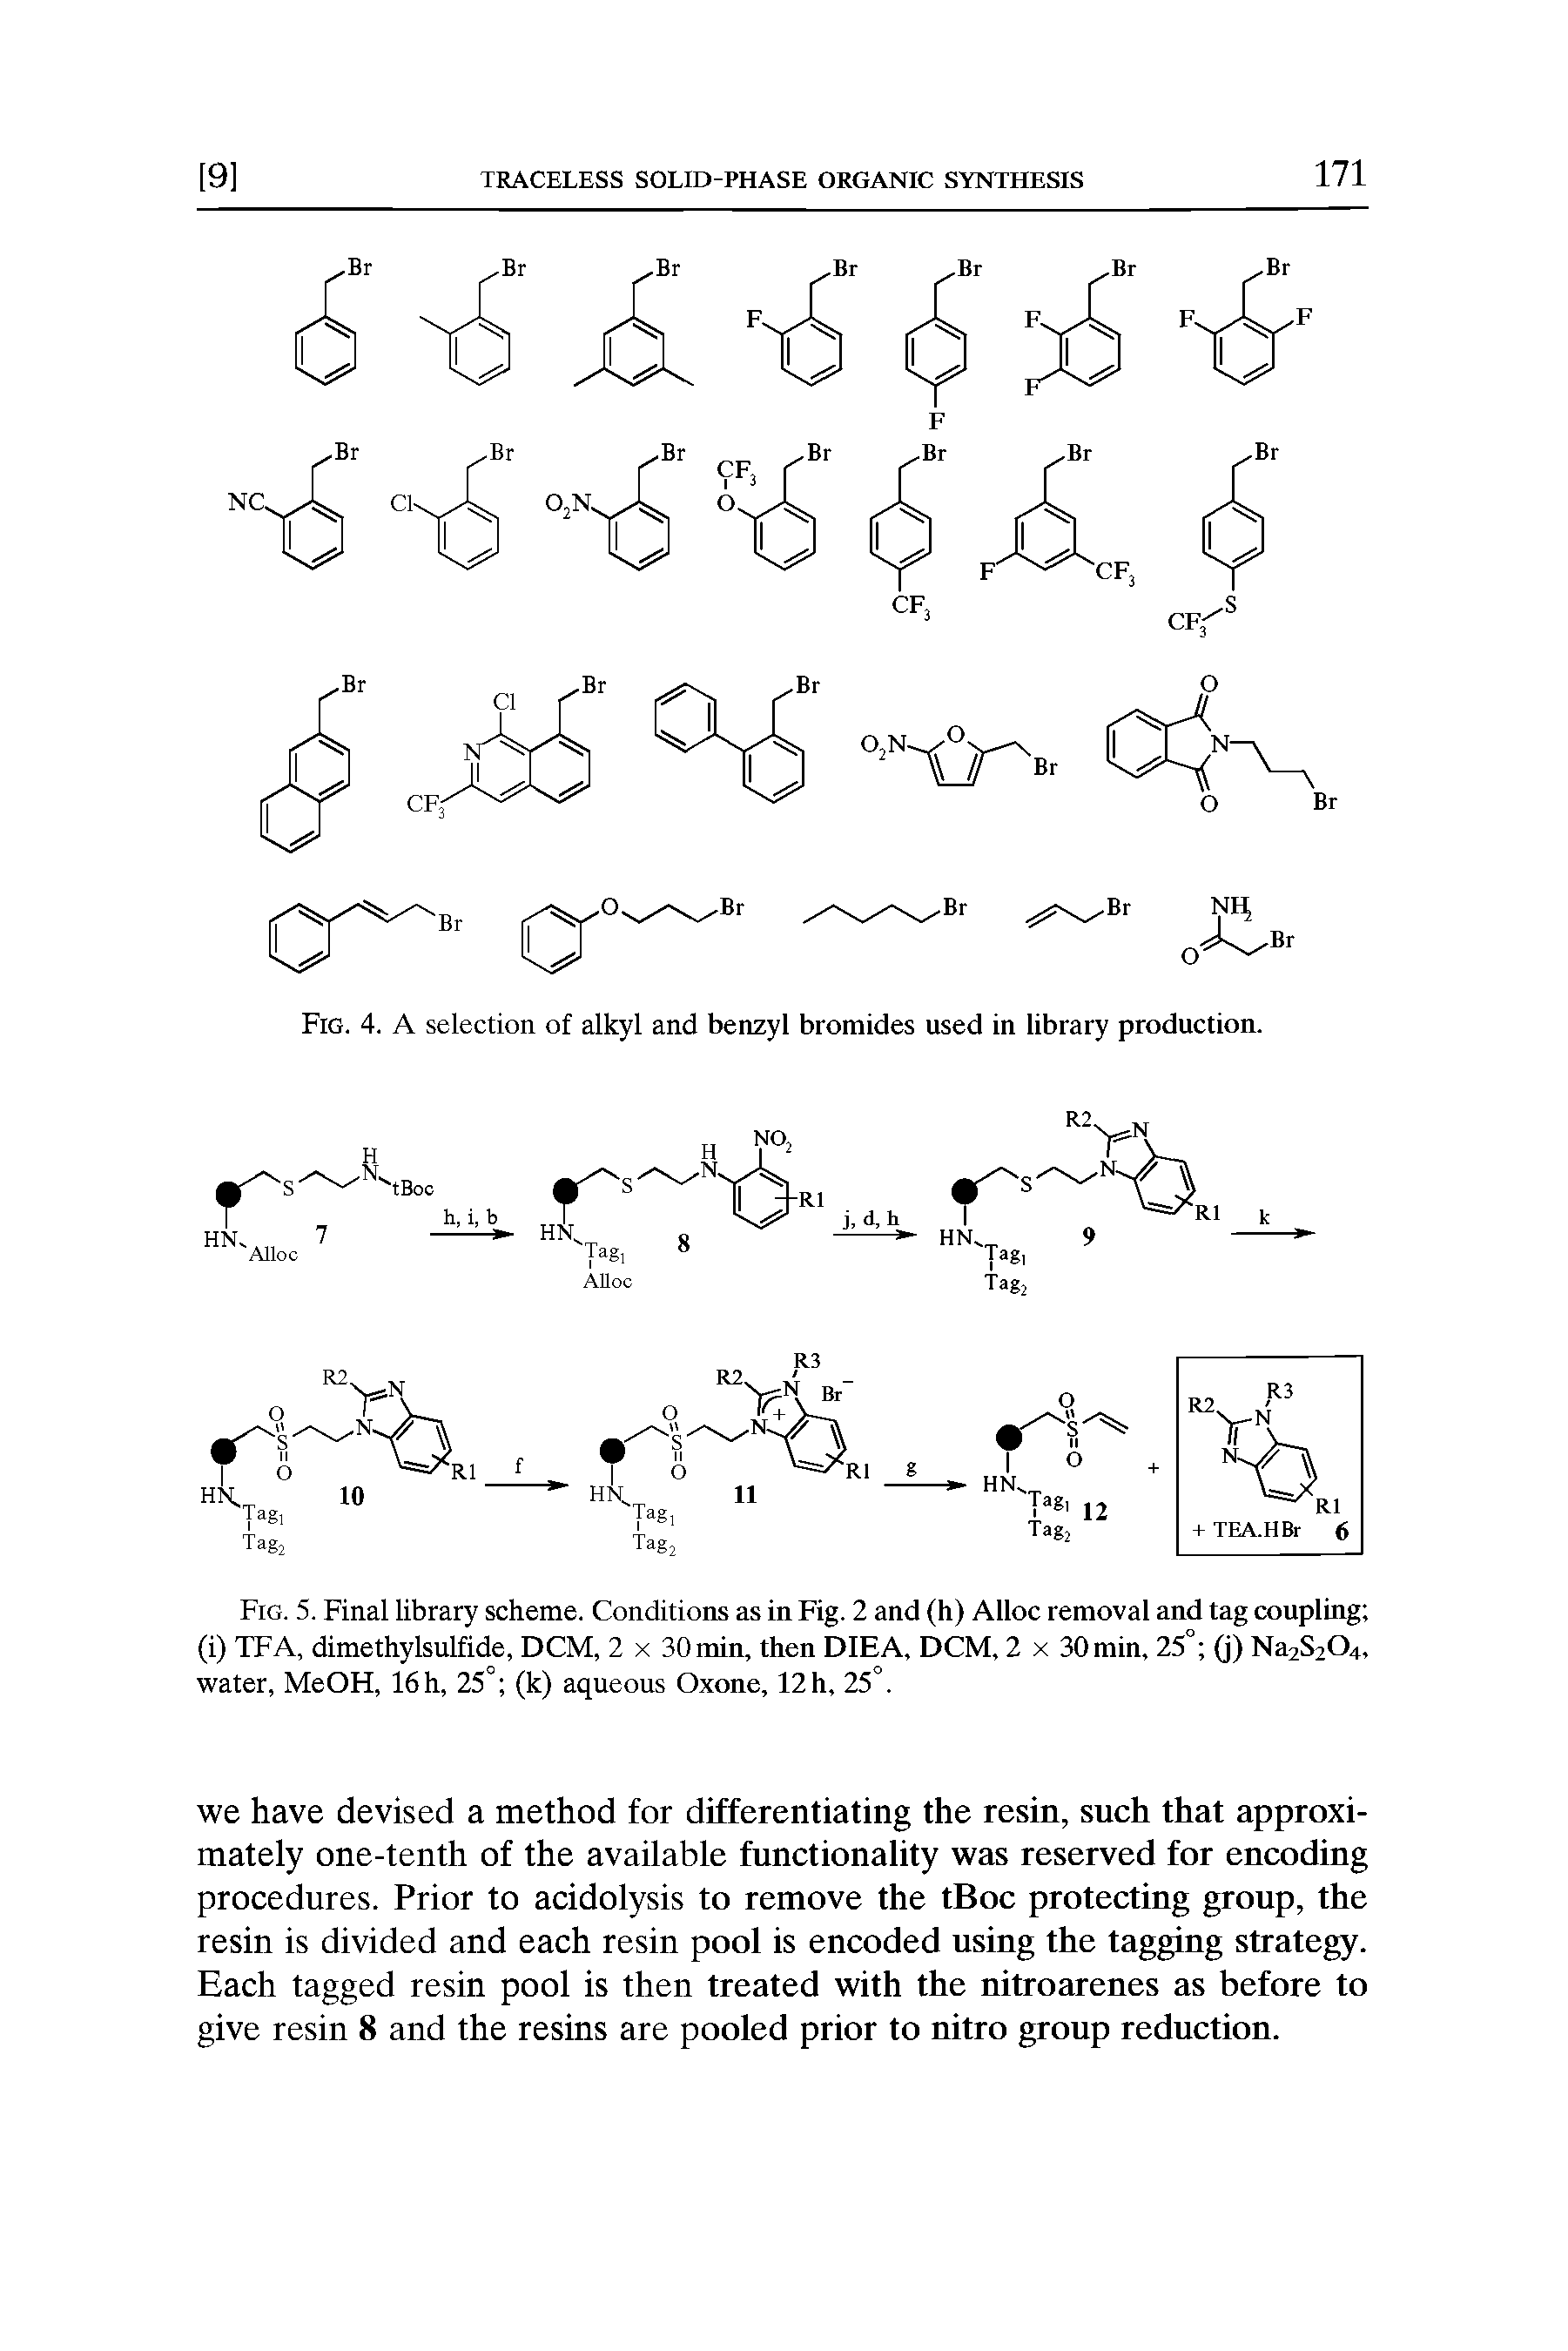 Fig. 5. Final library scheme. Conditions as in Fig. 2 and (h) Alloc removal and tag coupling (i) TFA, dimethylsulfide, DCM, 2 x 30min, then DIEA, DCM, 2 x 30min, 25° (j) Na2S204, water, MeOH, 16 h, 25° (k) aqueous Oxone, 12 h, 25°.